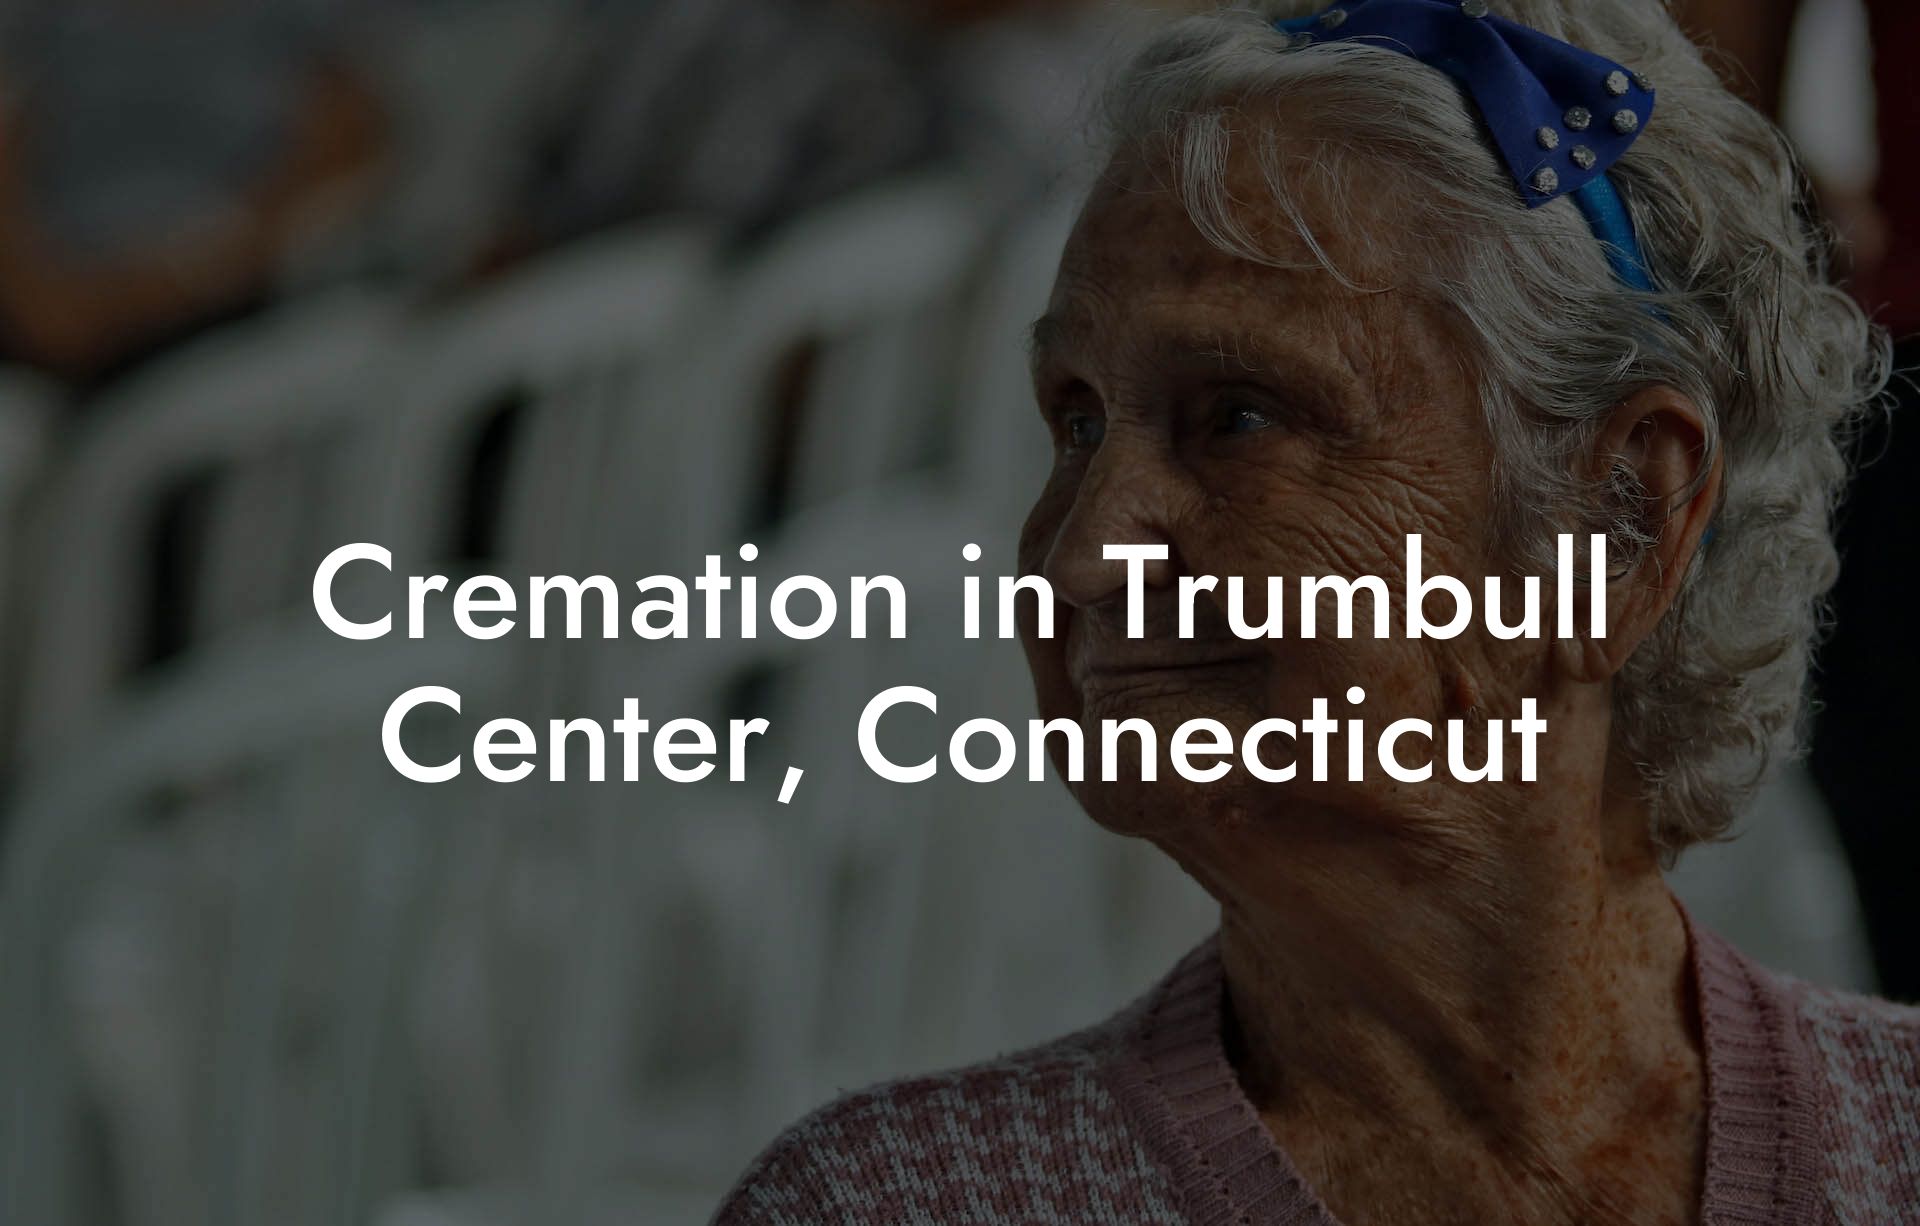 Cremation in Trumbull Center, Connecticut